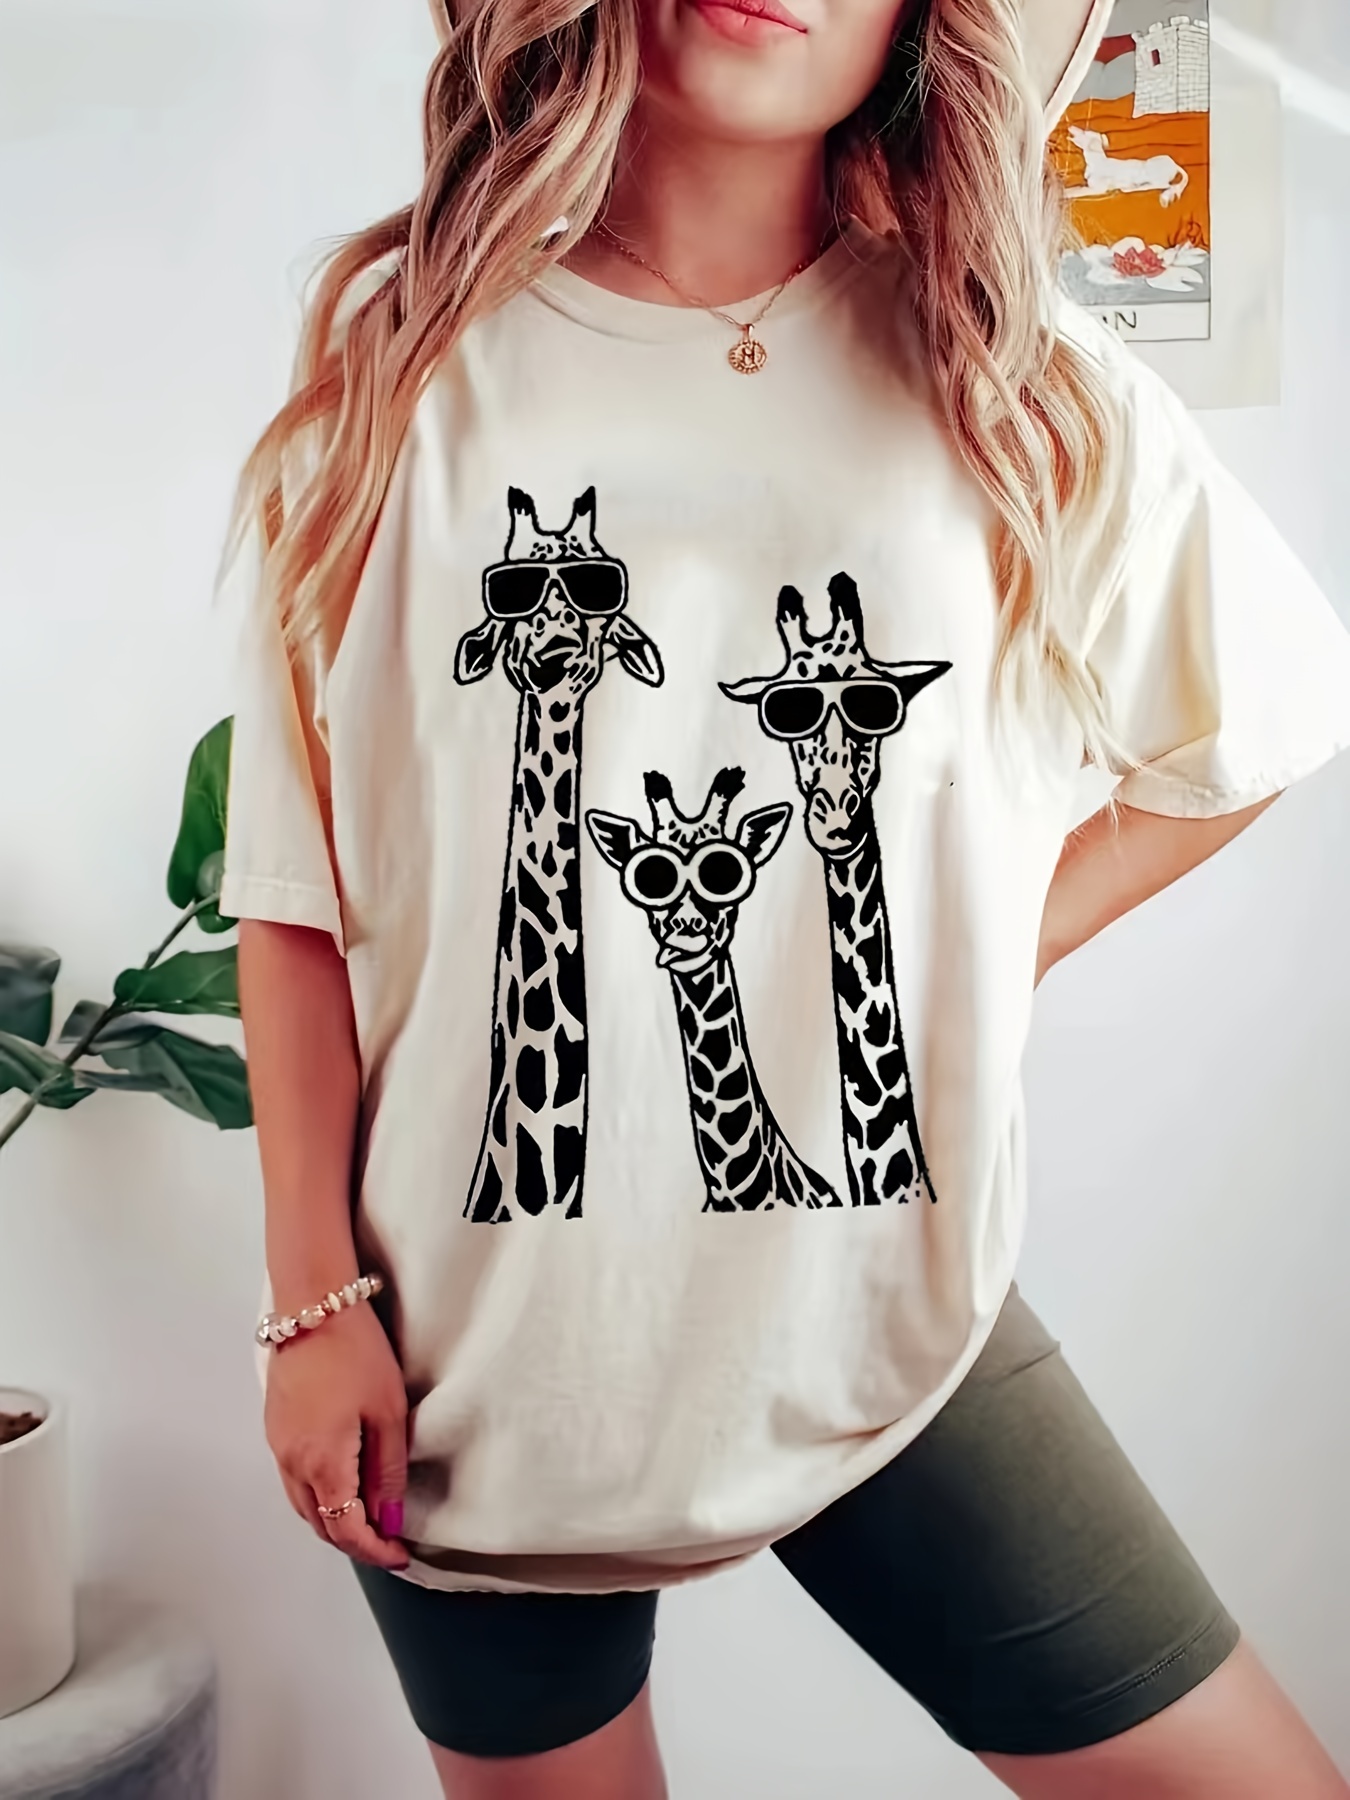  Womens Giraffe Shirts Casual Ladies Cute Graphic Tees Spring  Short Sleeve T Shirts Plus Size Summer Tops : Clothing, Shoes & Jewelry